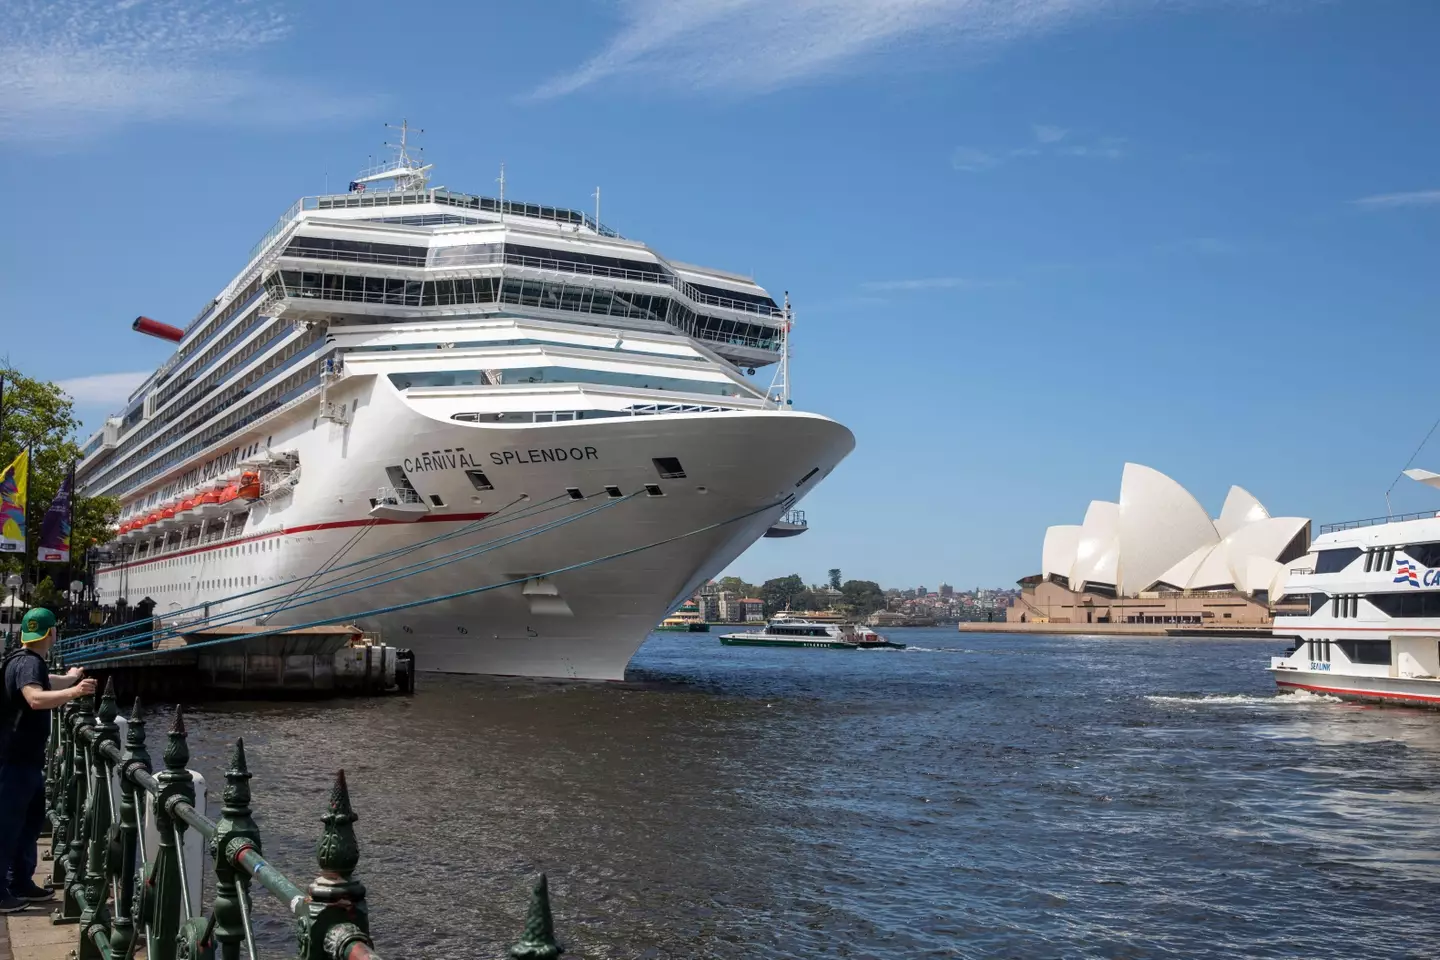 The man had been travelling on board the Carnival Splendor cruise ship.